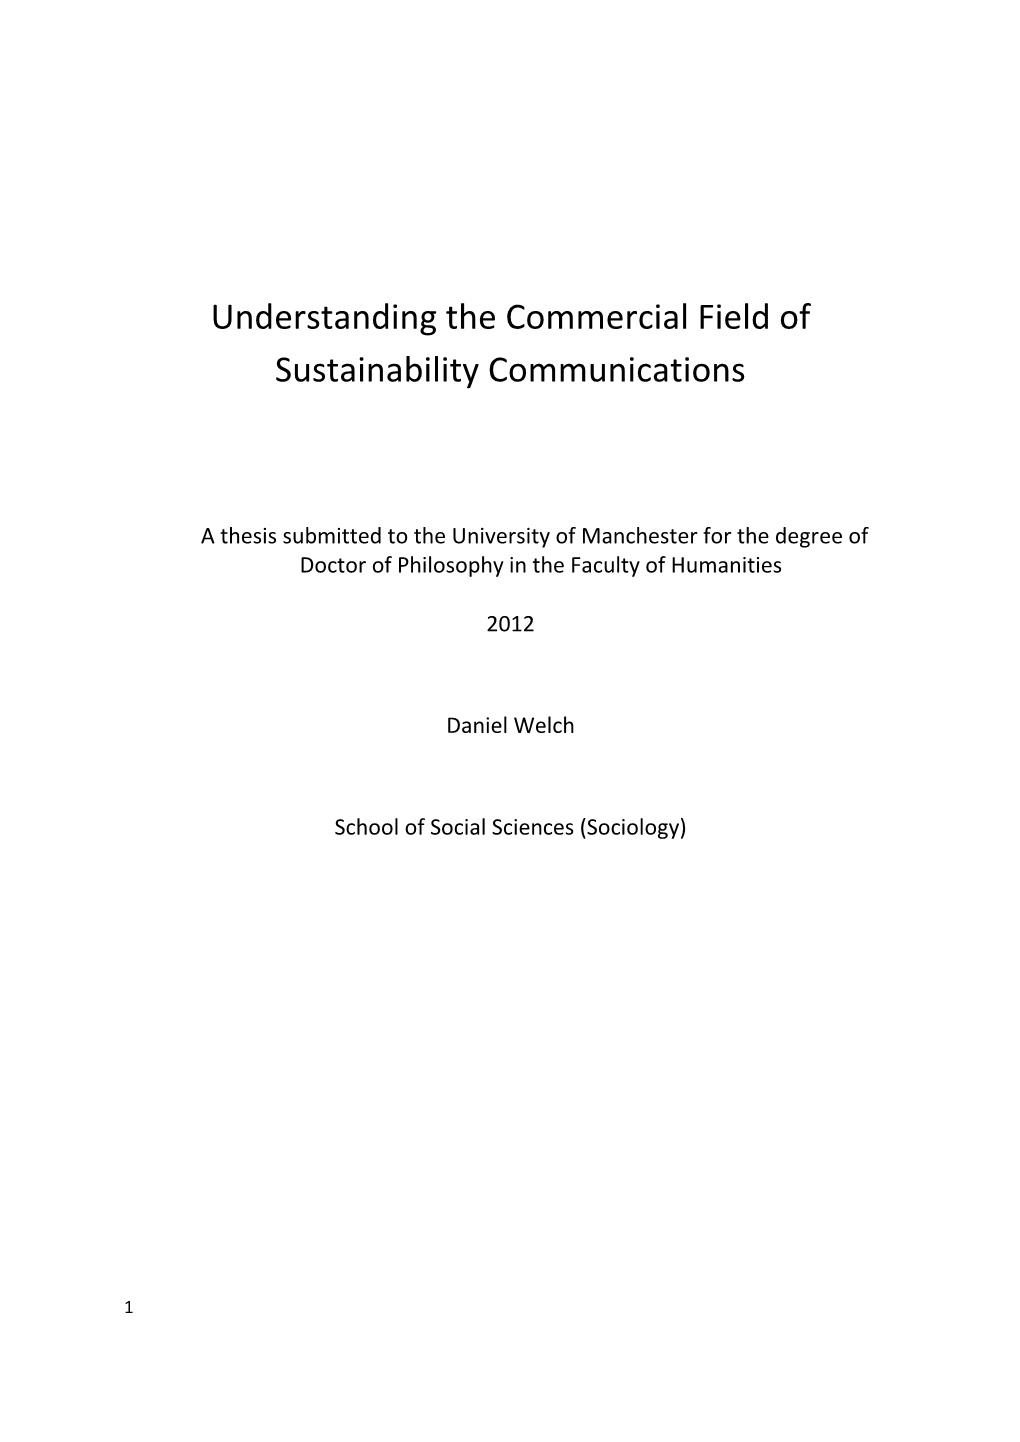 Understanding the Commercial Field of Sustainability Communications